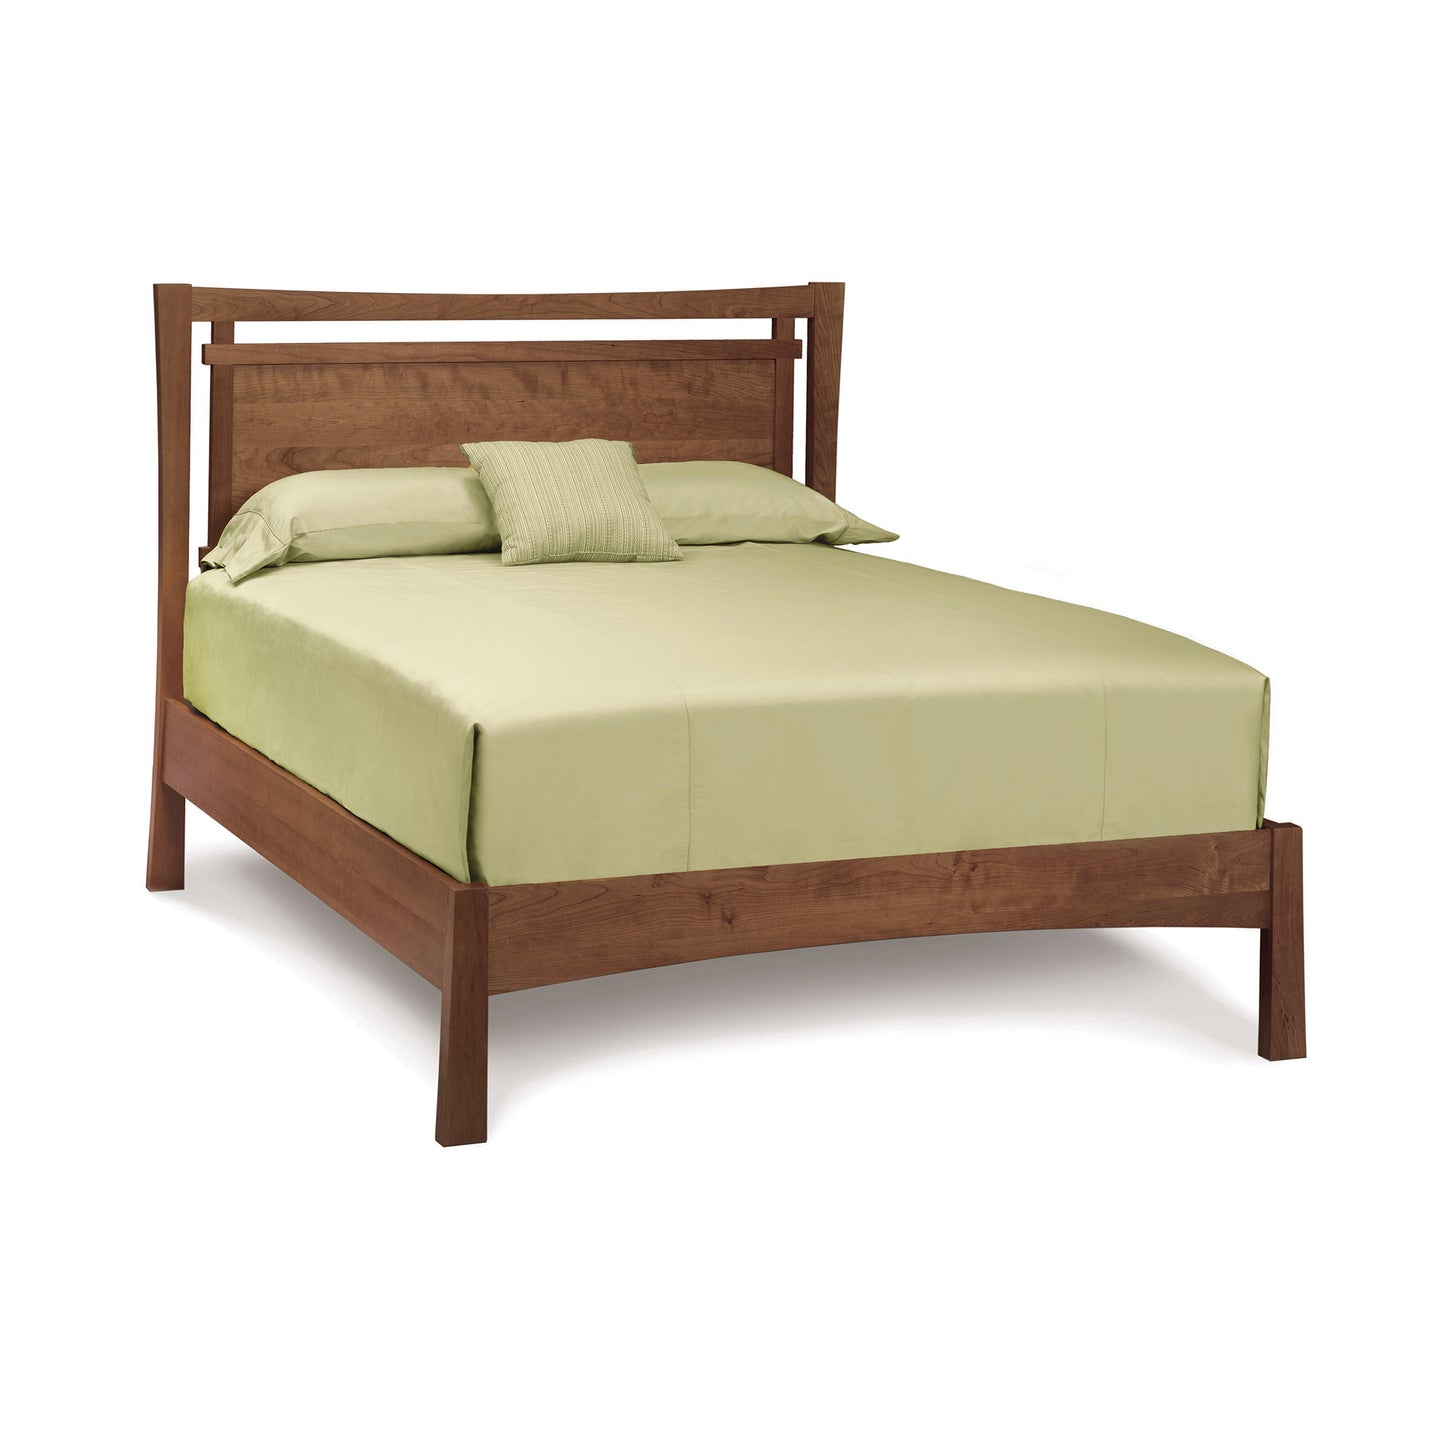 An eco-friendly Monterey Platform Bed frame with a matching headboard, dressed with a pale green bed sheet set and two pillows in a room with a white background.